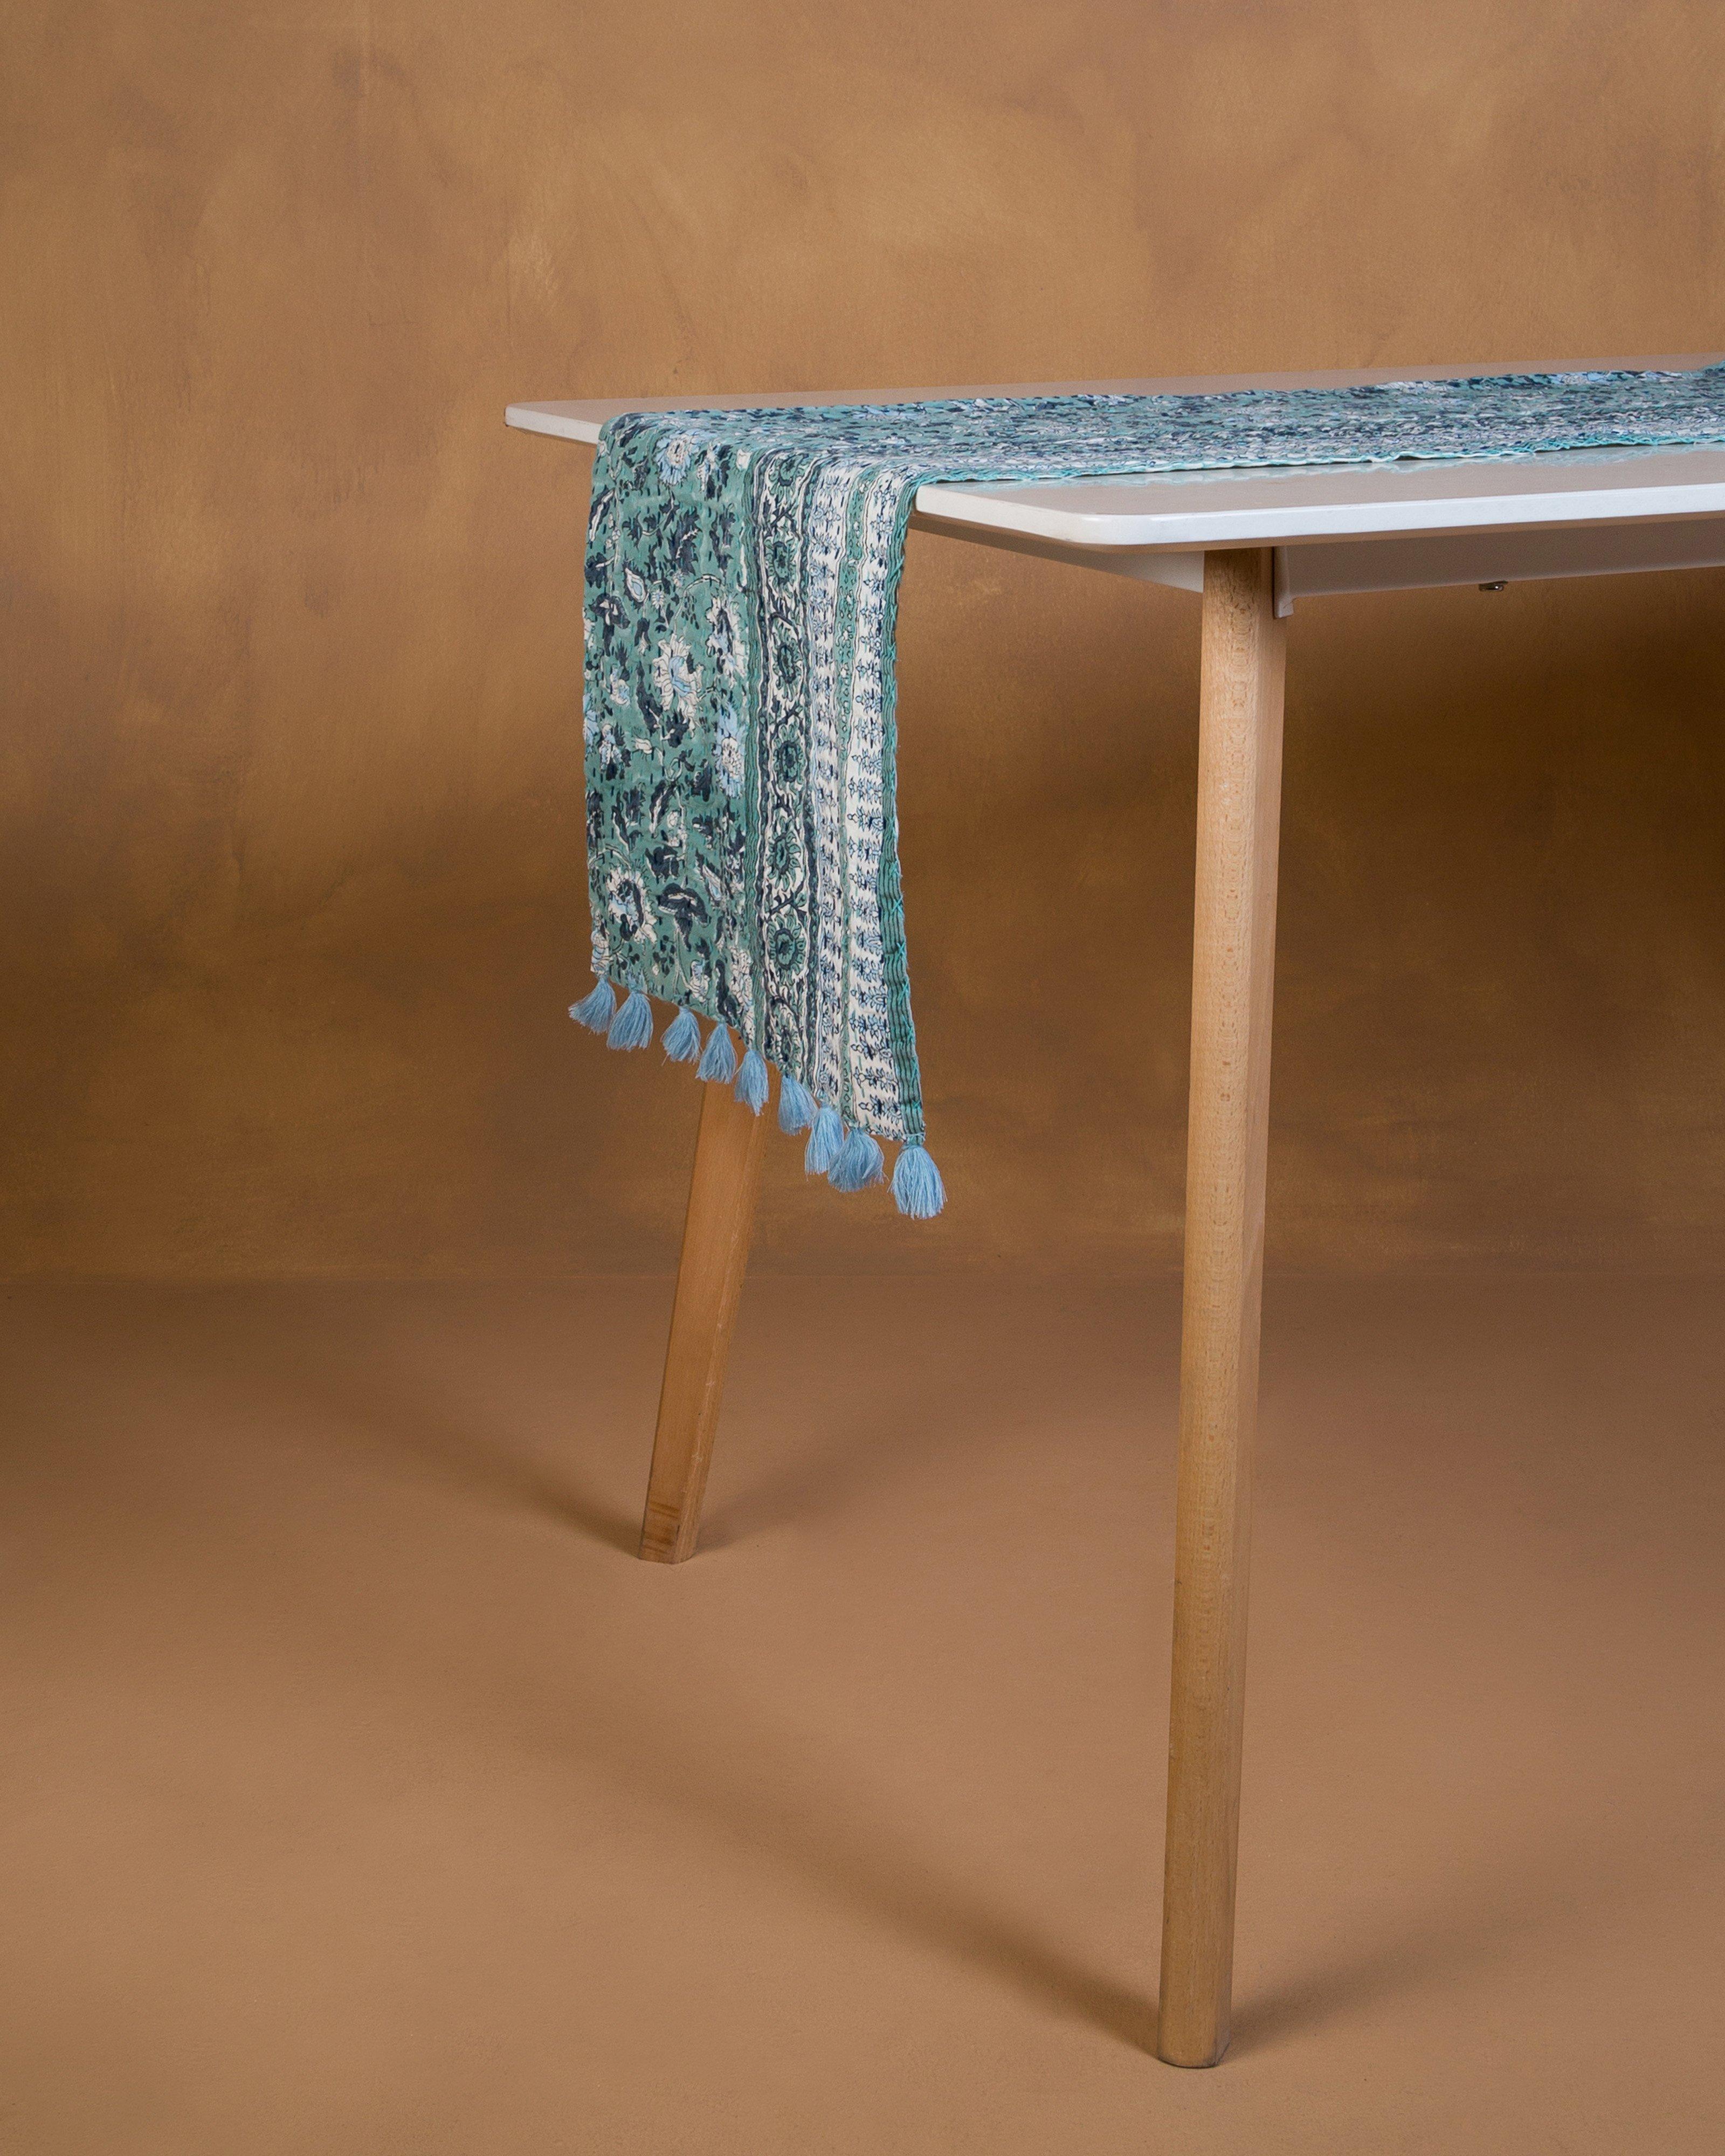 Block Print Table Runner with Kantha Stitch -  Blue